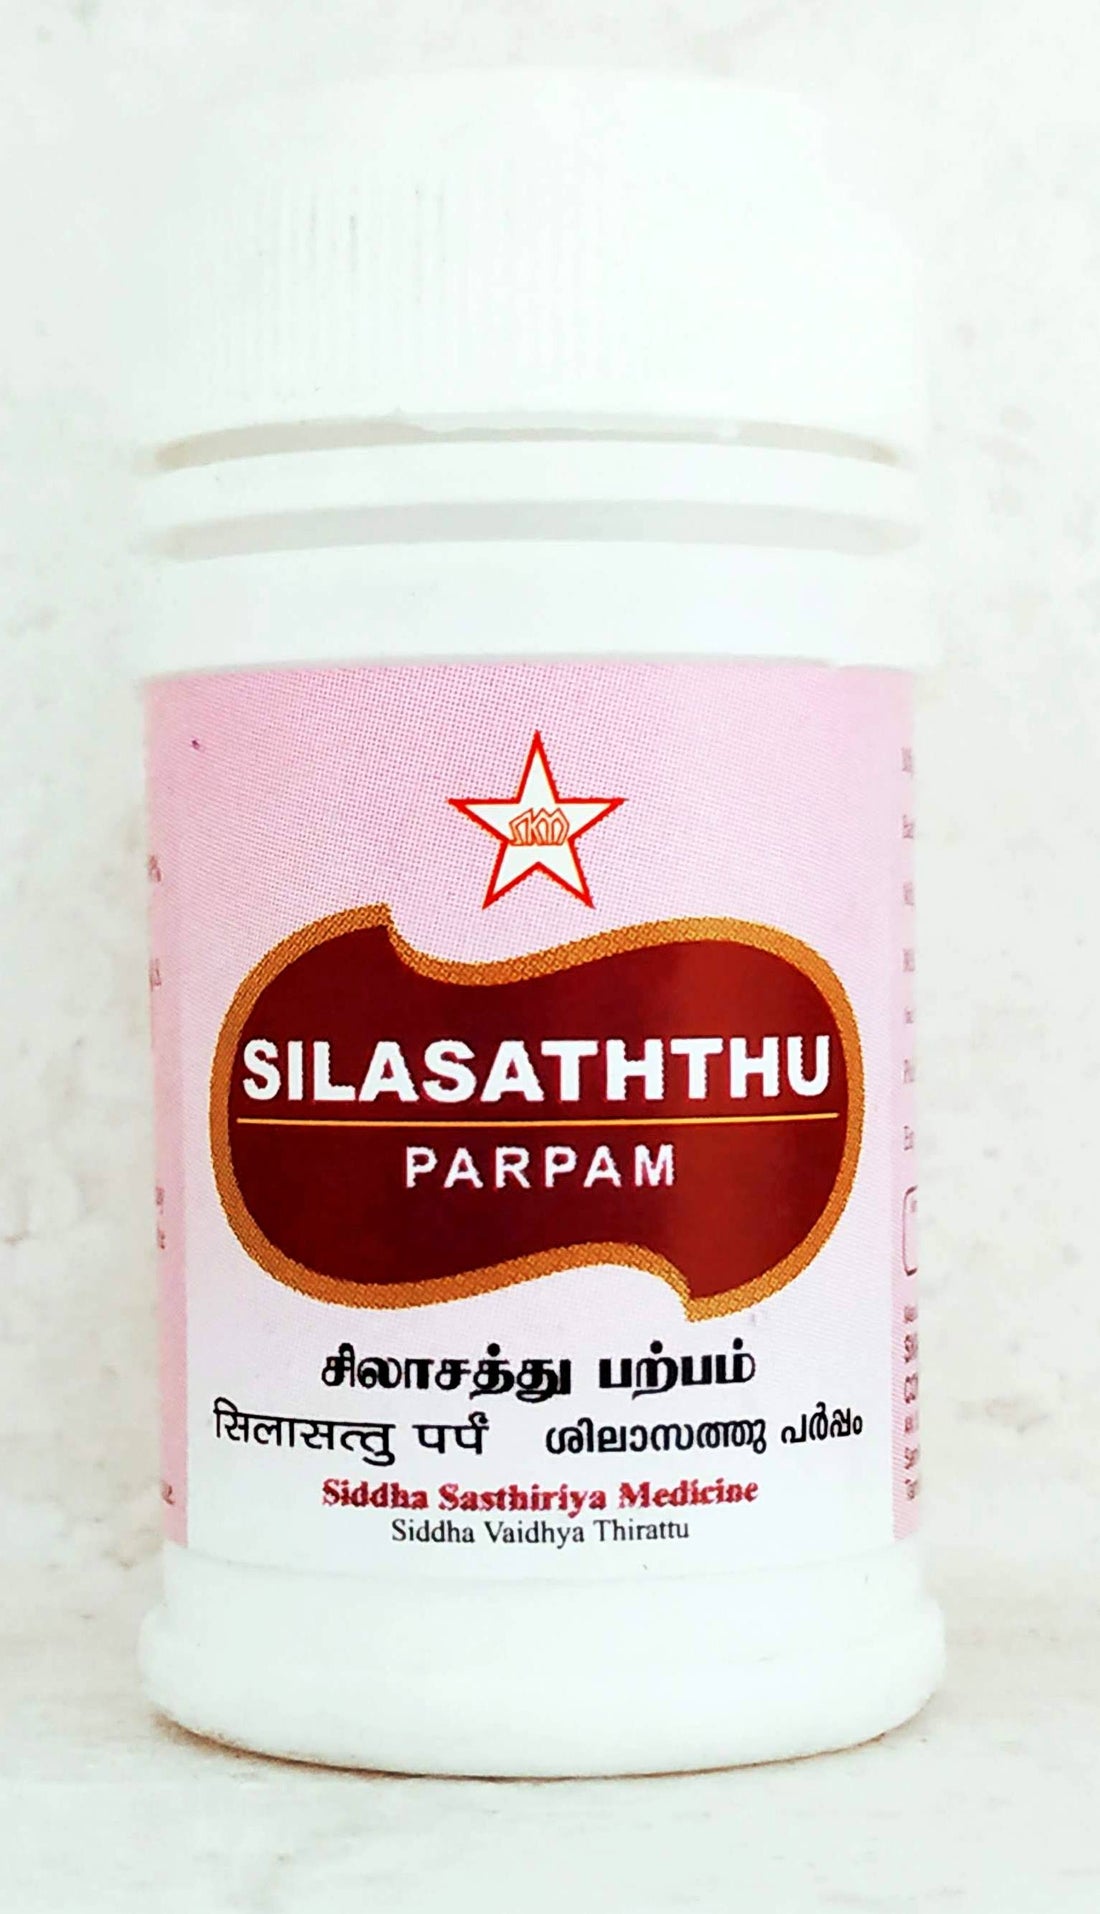 Shop Silasathu Parpam 10gm at price 44.00 from SKM Online - Ayush Care